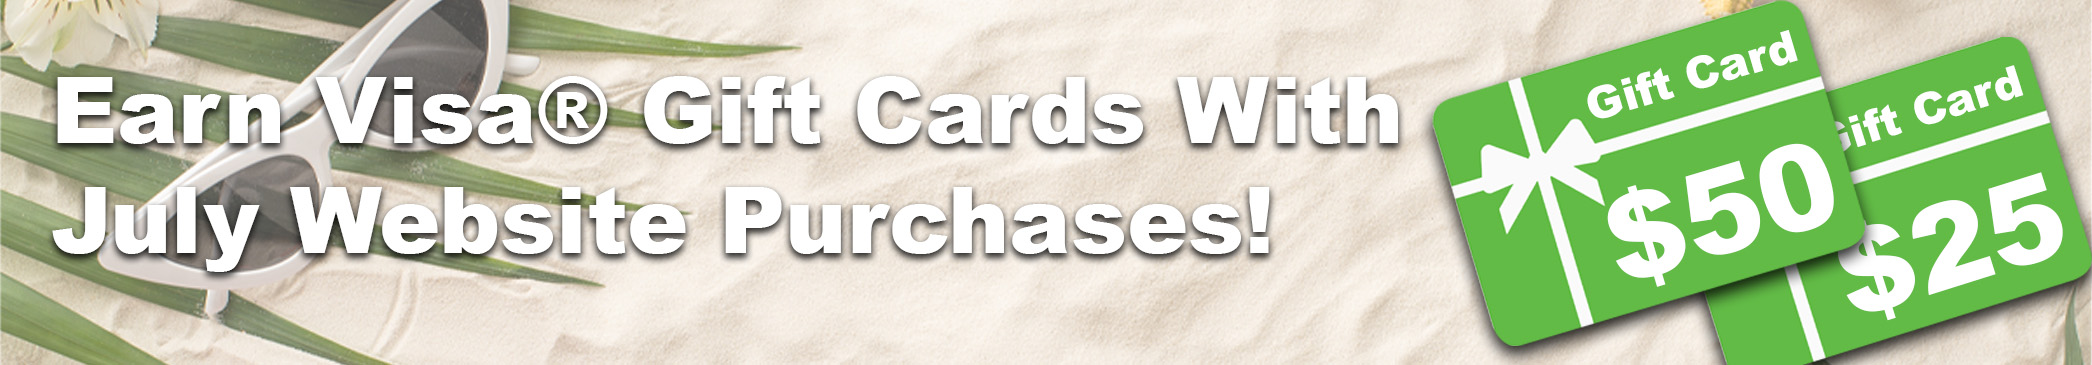 Earn Visa® Gift Cards with July Website Purchases